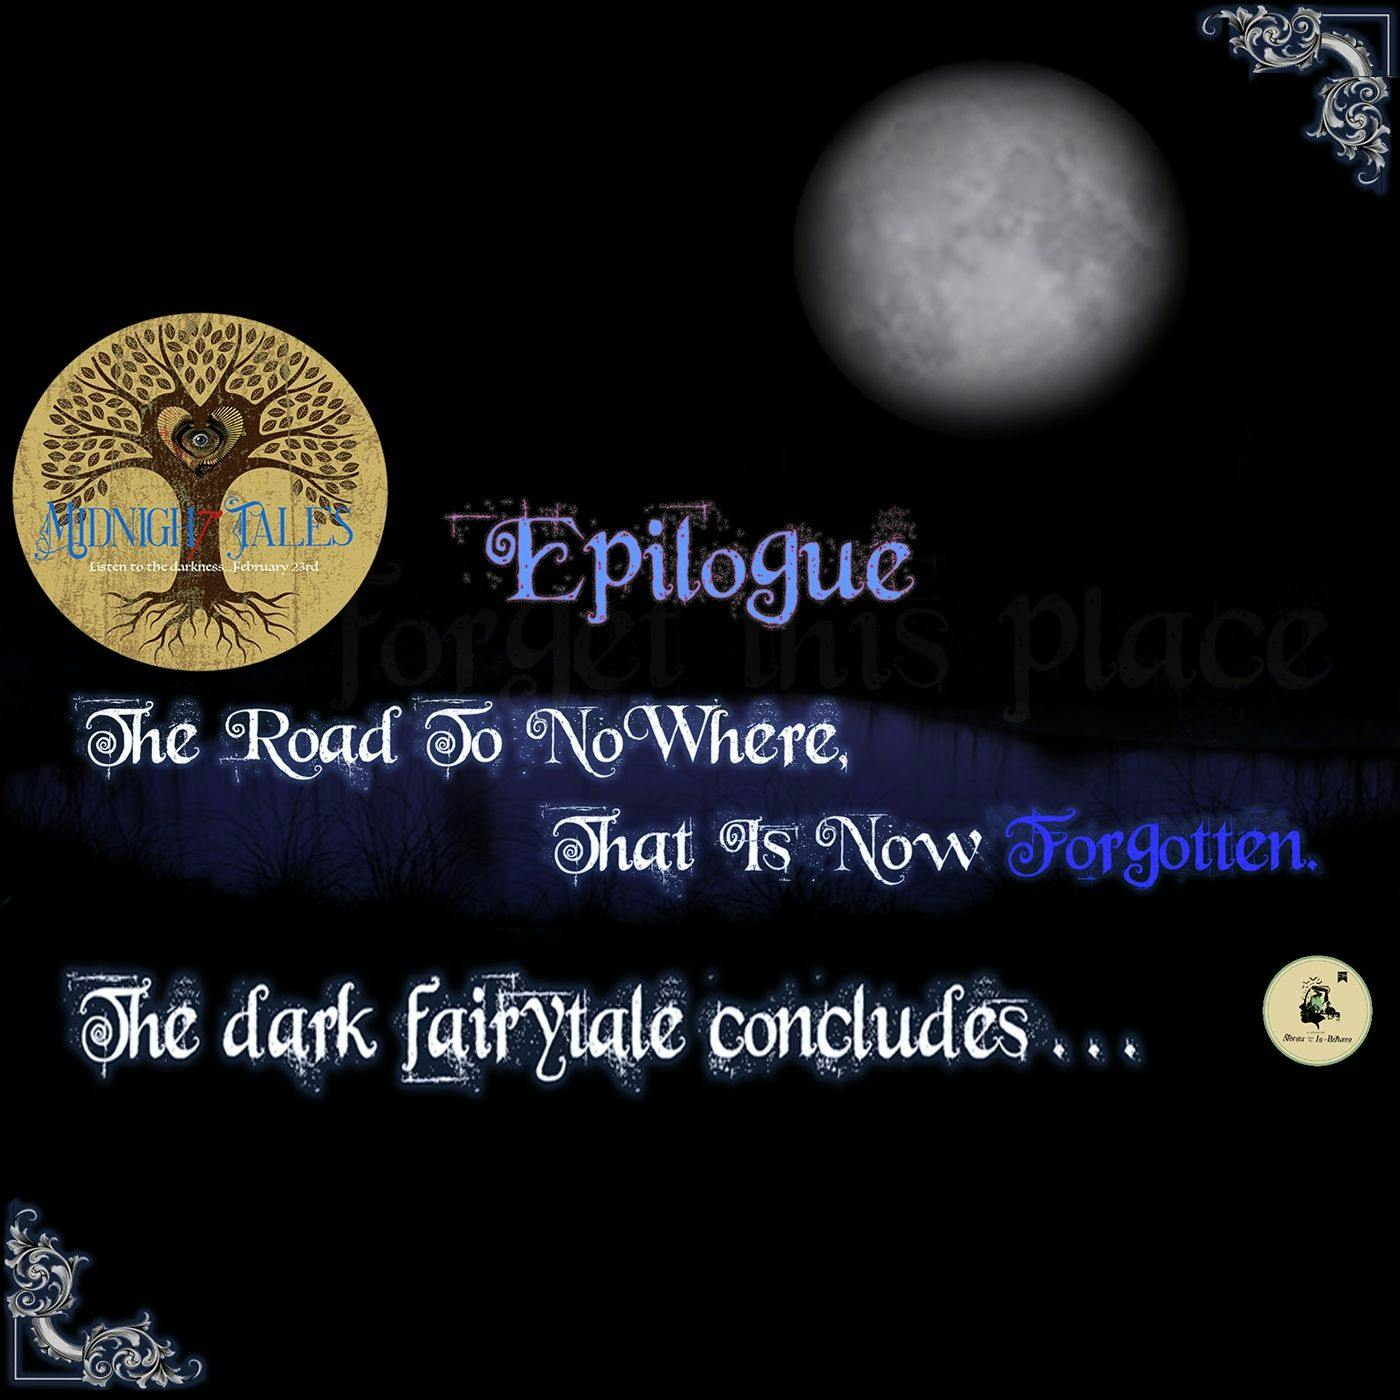 53 // Midnight Tales - Epilogue - The Road to Nowhere That is Now Forgotten